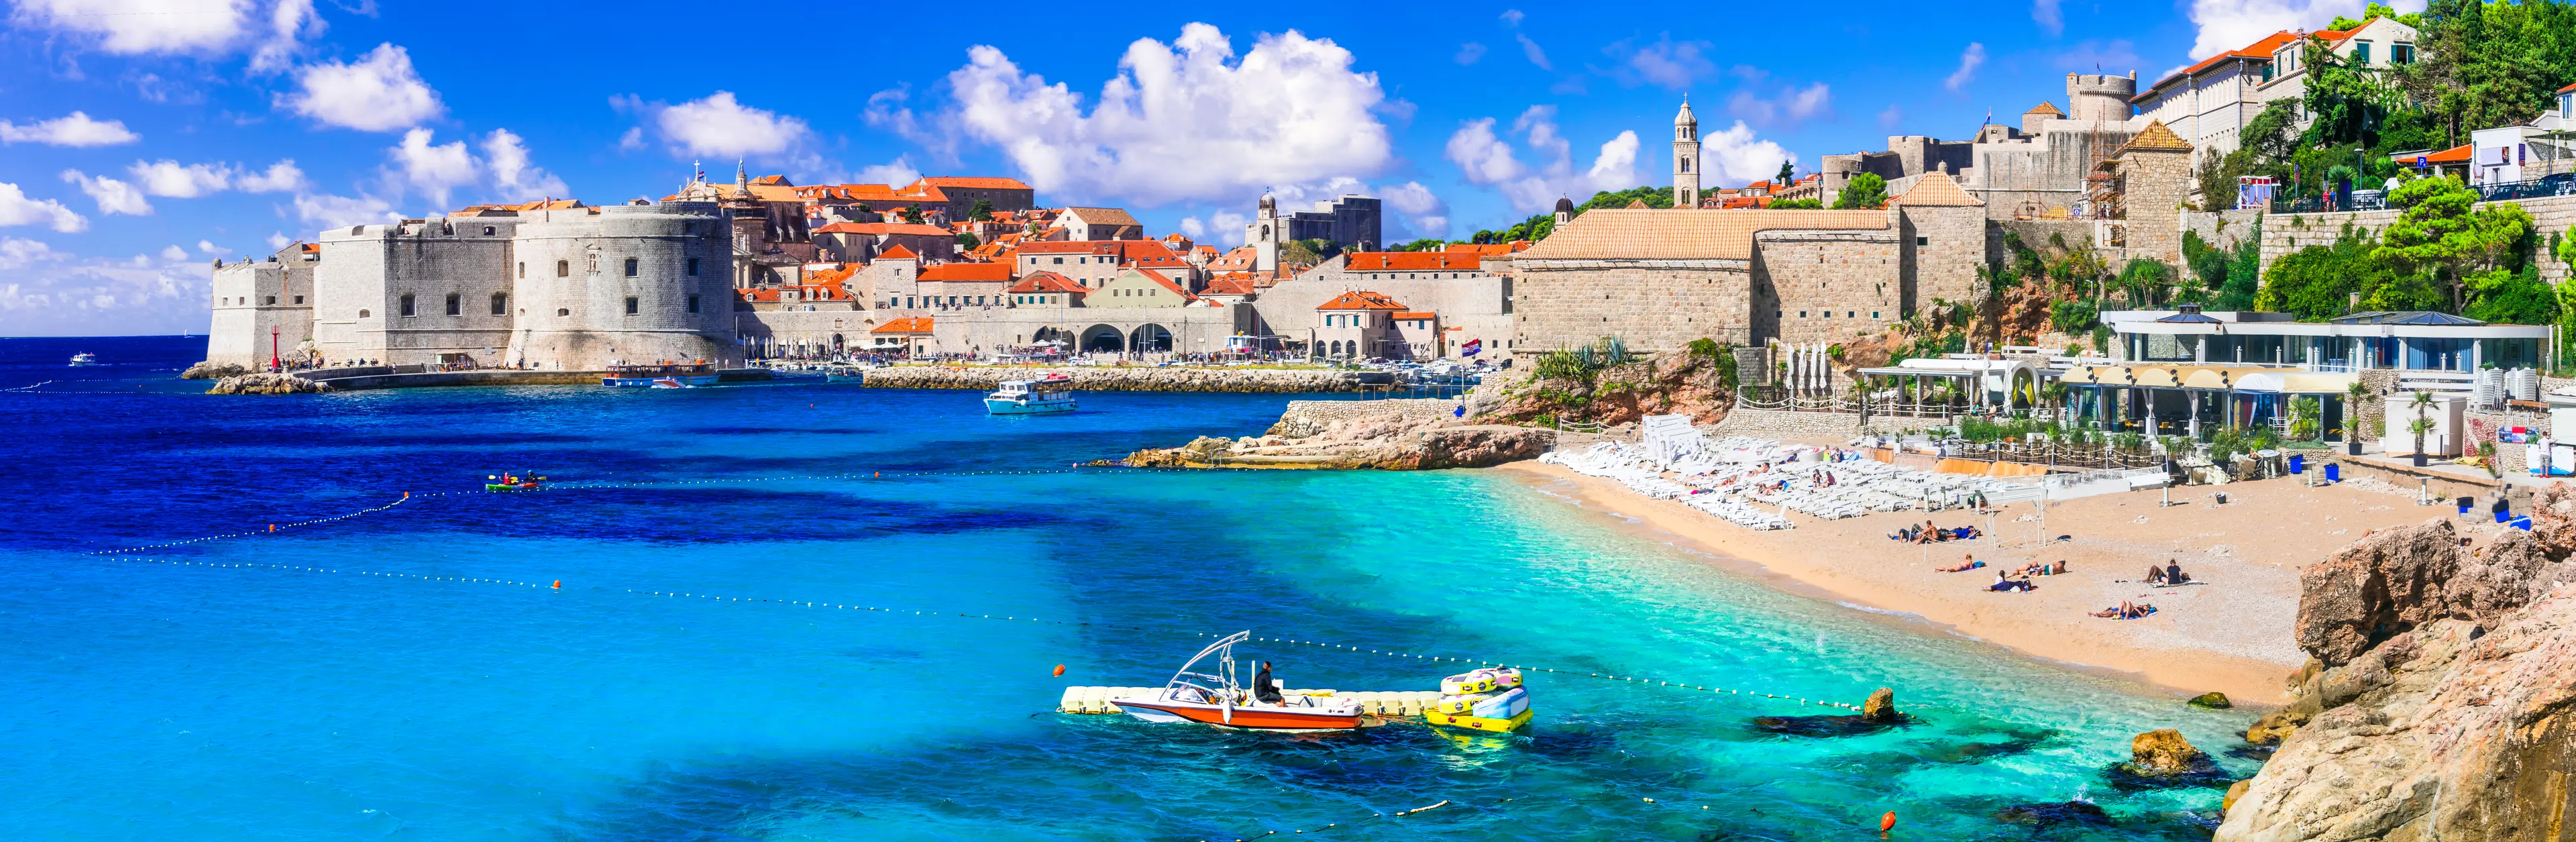 2-Day Local Dubrovnik Experience for Couples: Outdoor, Food & Wine